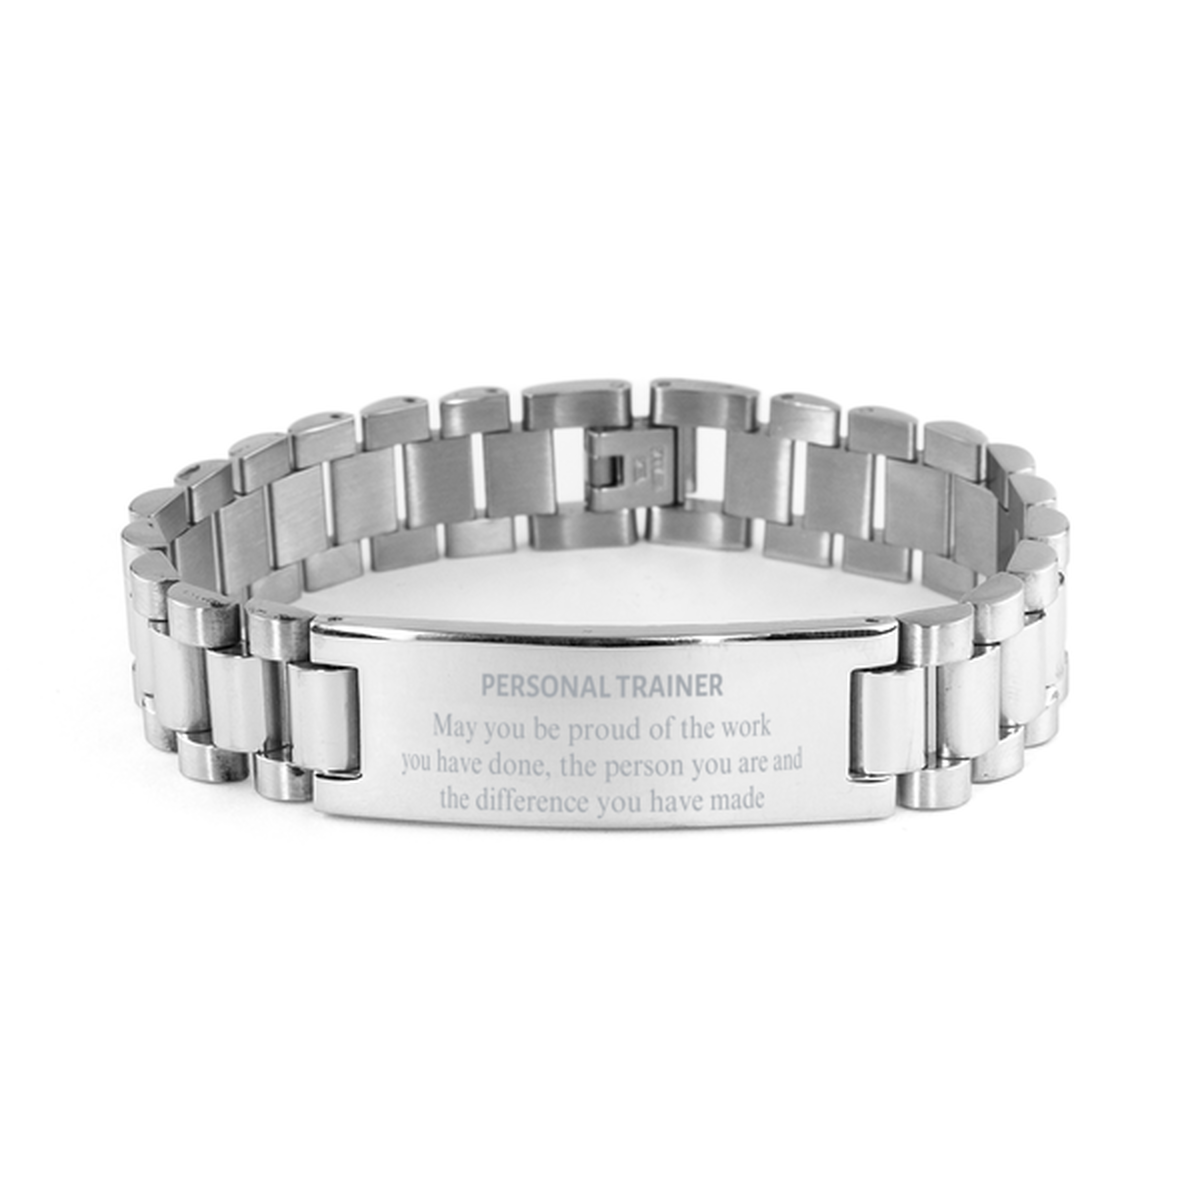 Personal Trainer May you be proud of the work you have done, Retirement Personal Trainer Ladder Stainless Steel Bracelet for Colleague Appreciation Gifts Amazing for Personal Trainer